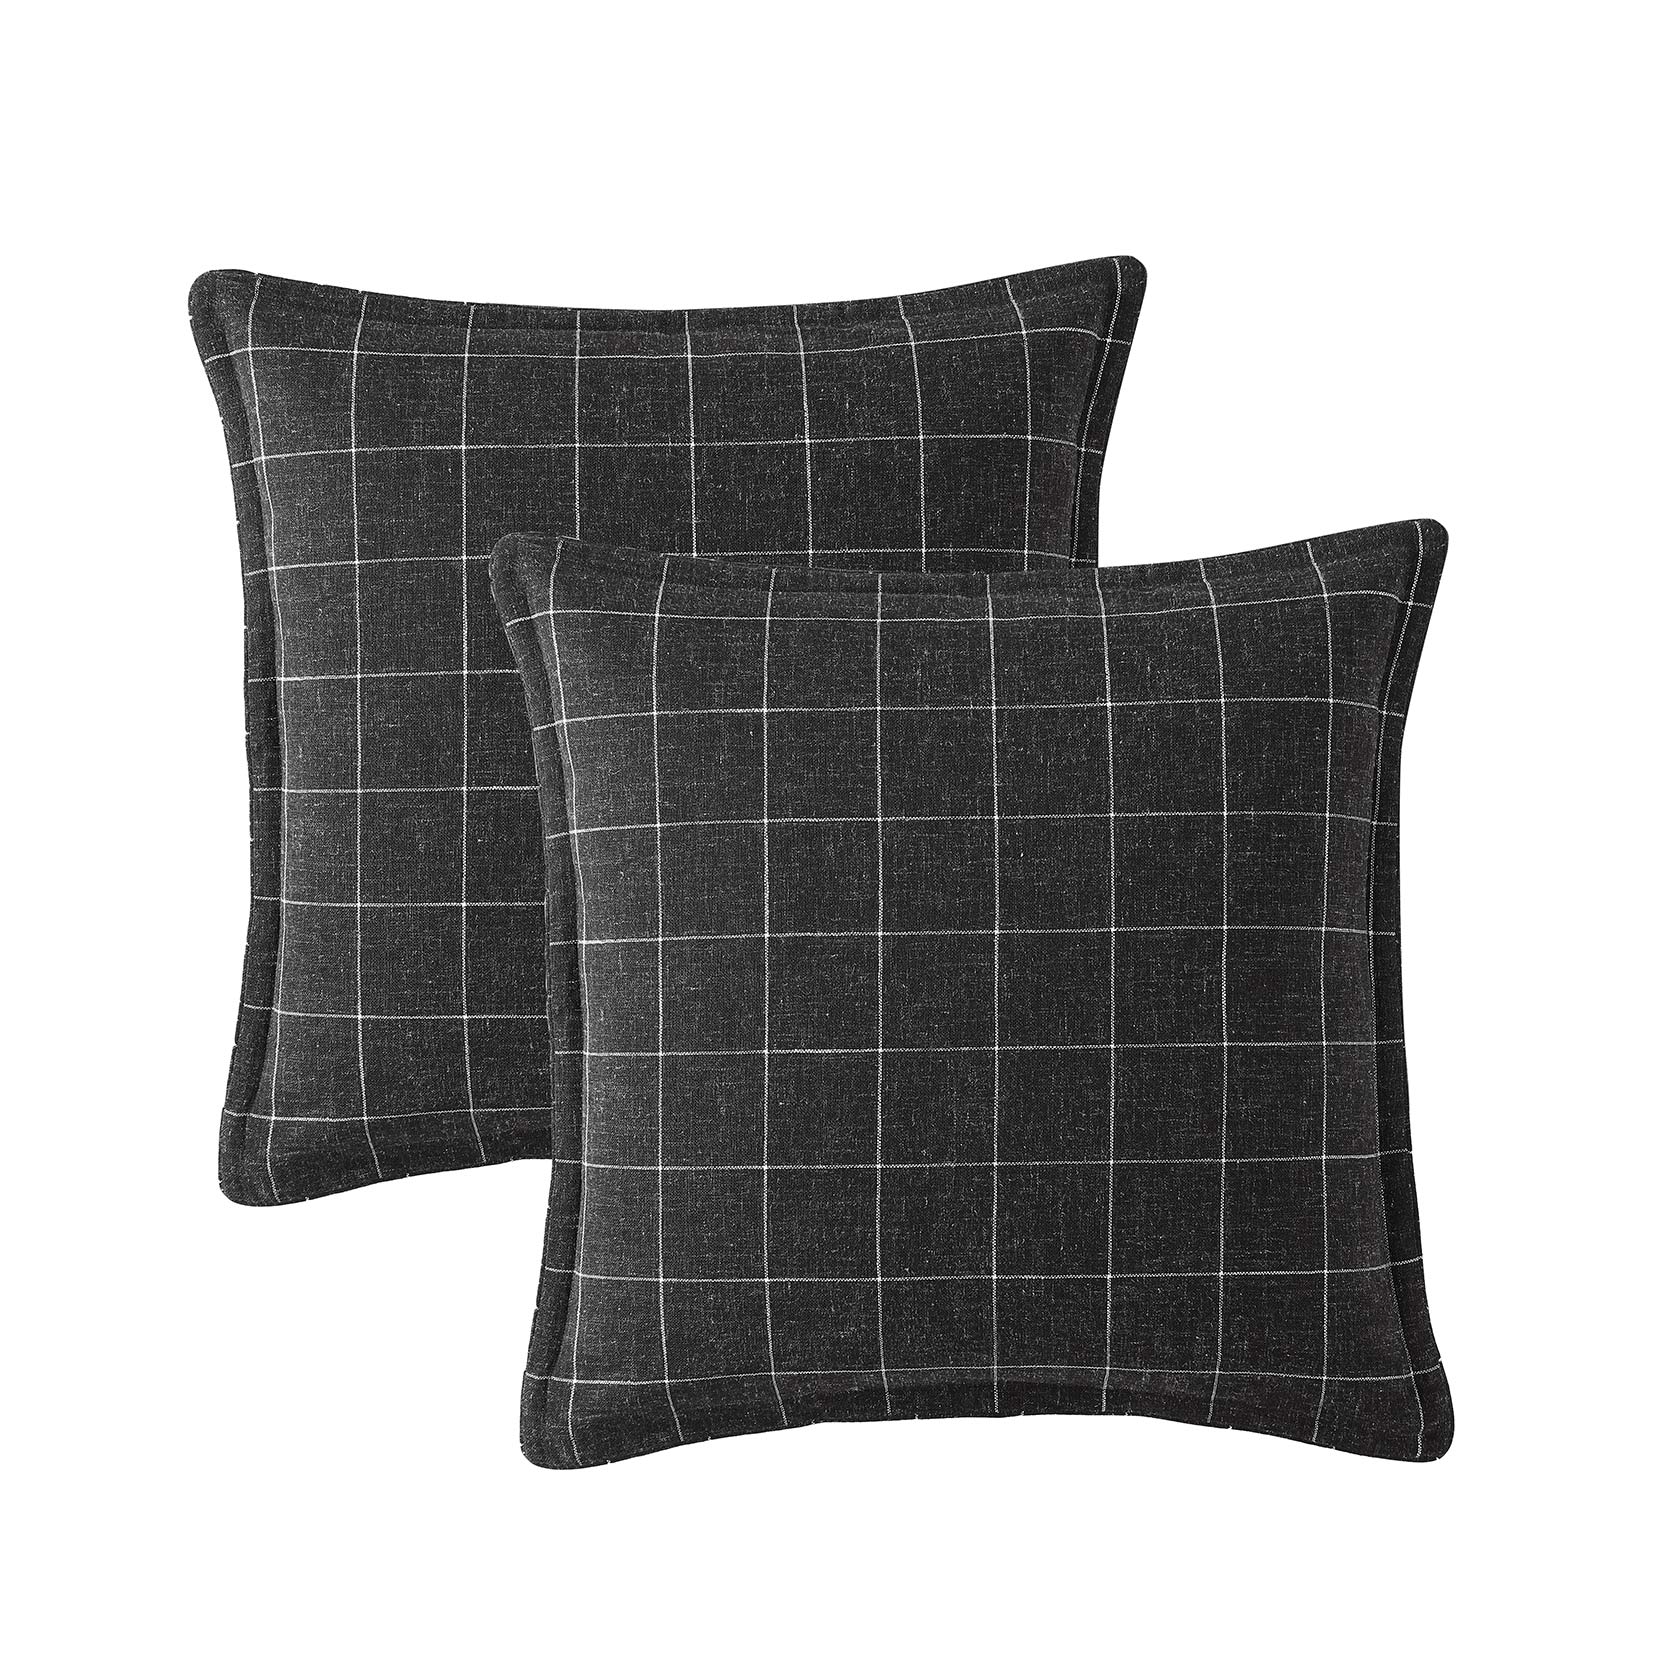 Fitzgerald Coal European Pillowcase by Private Collection